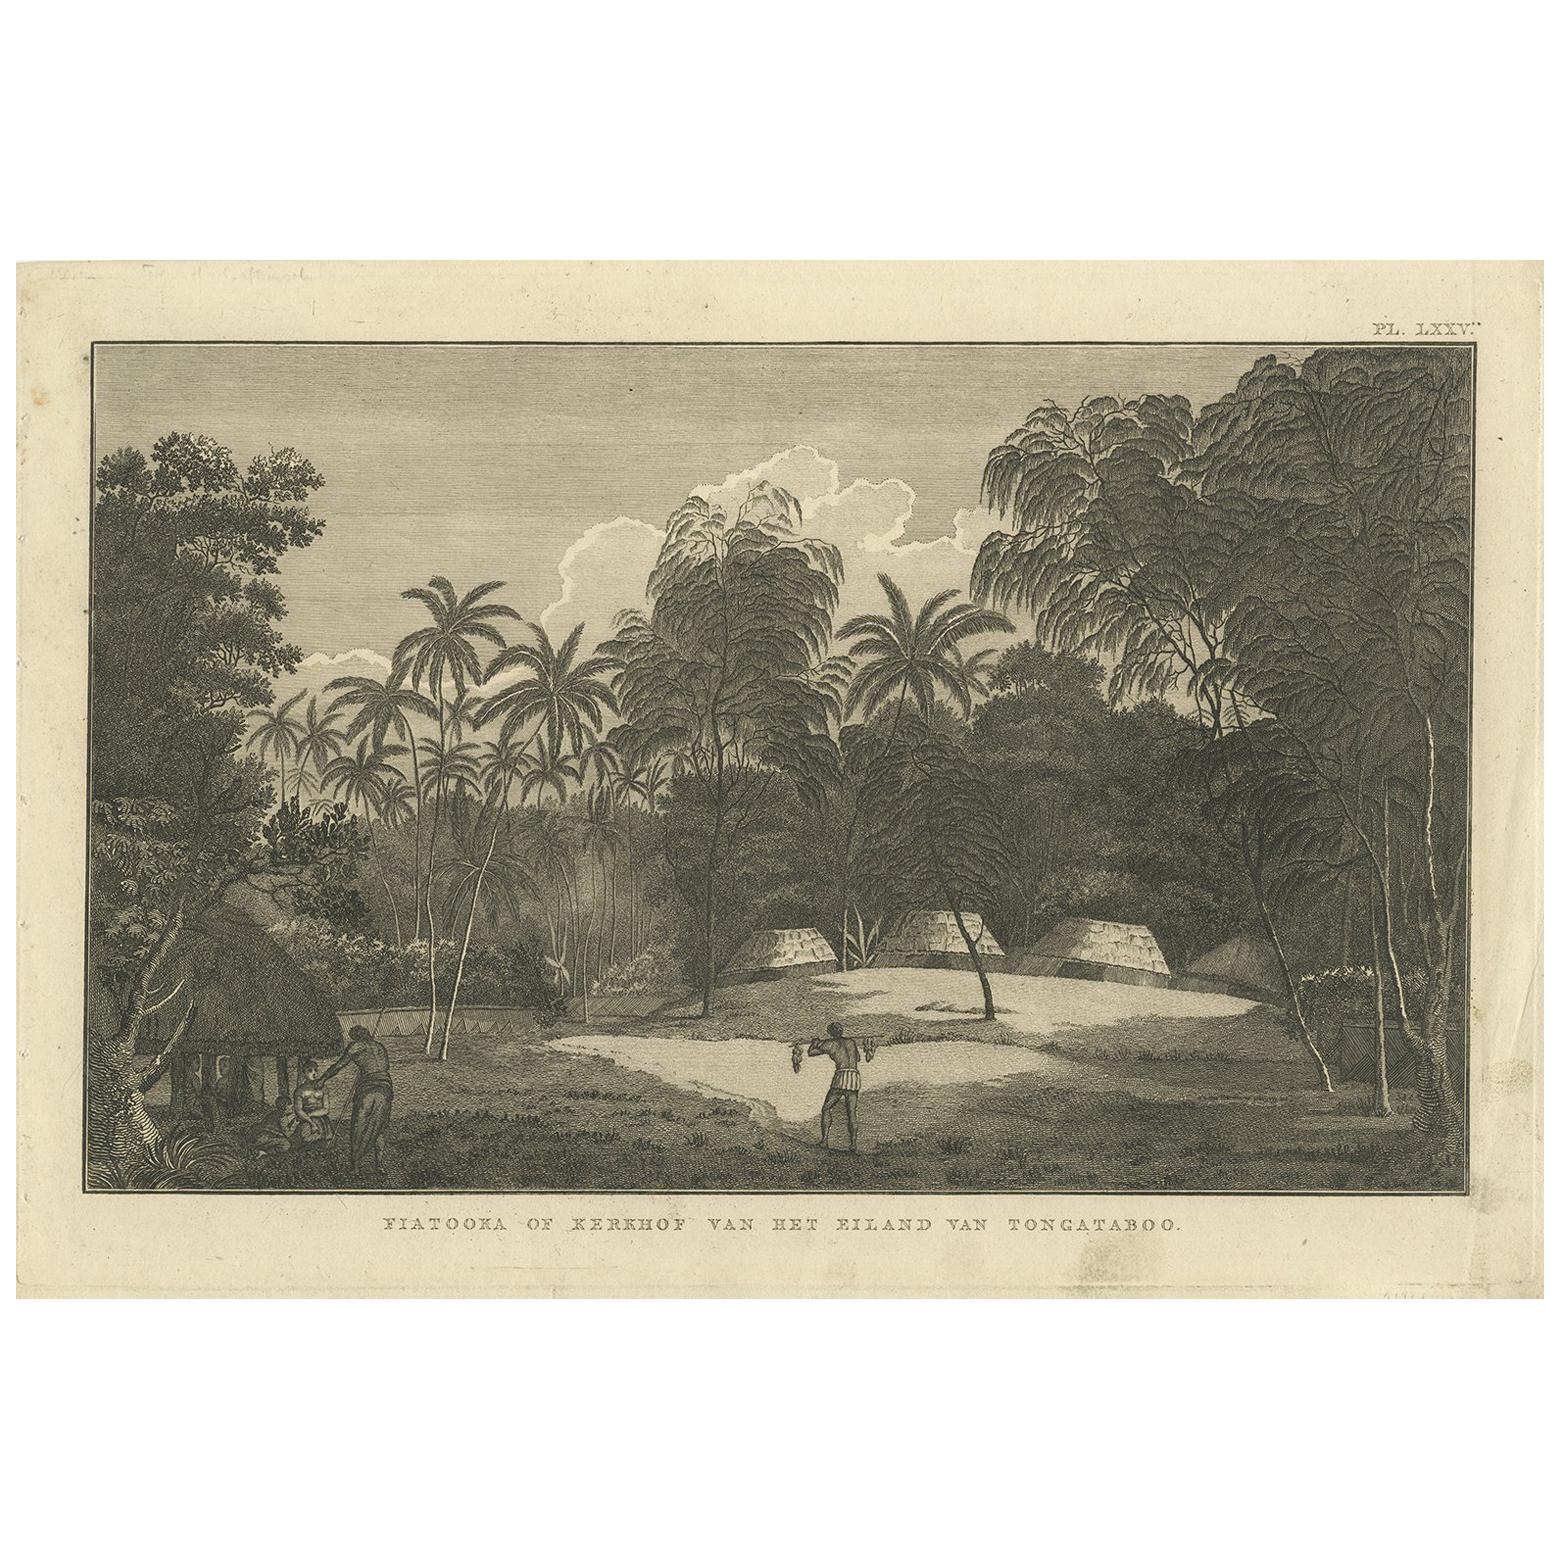 Antique Print of the Cemetery on the Island Tongatapu by Cook, circa 1801